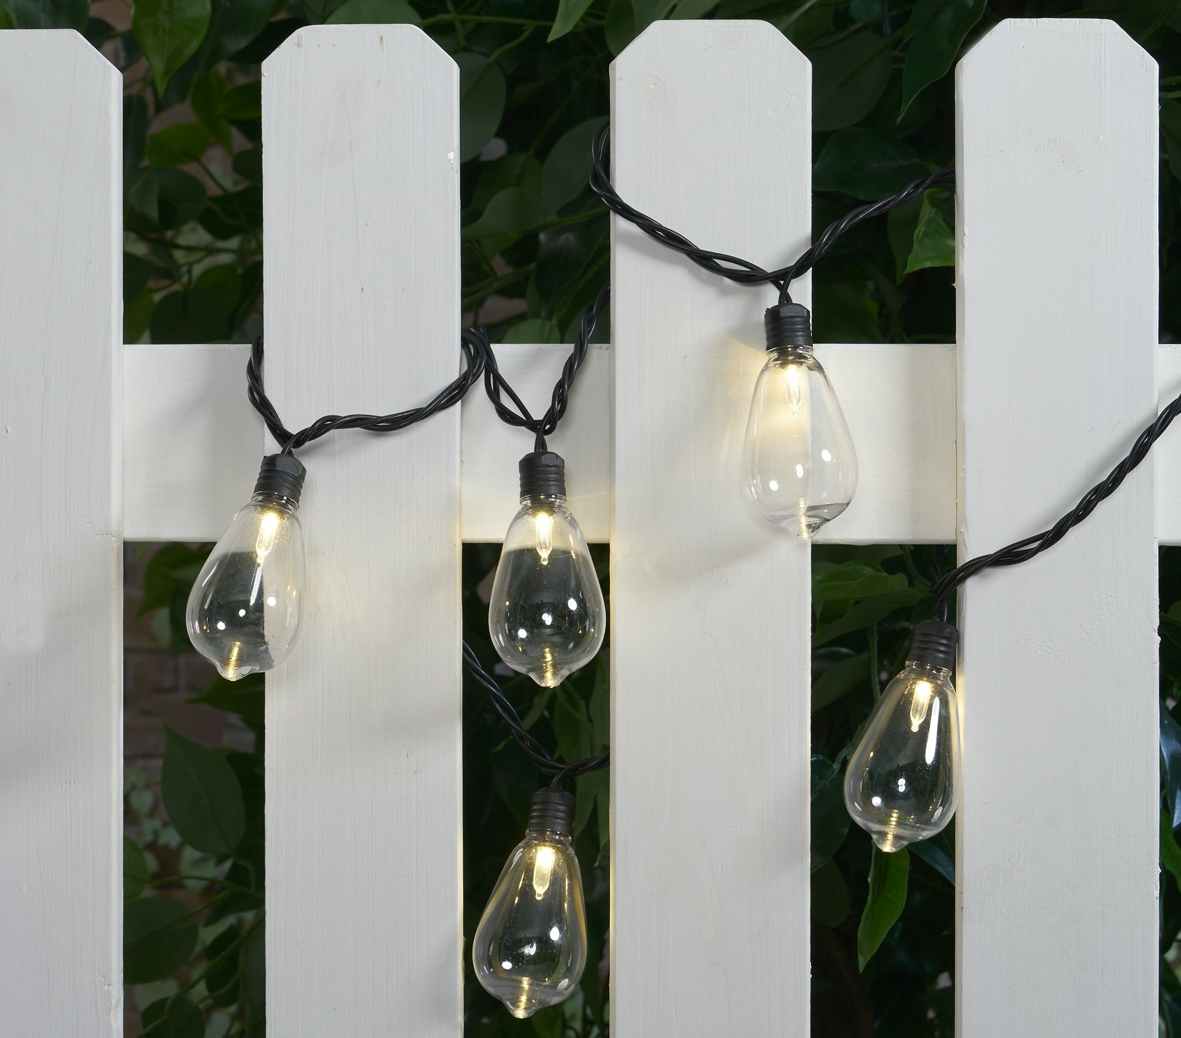 screenshot of Walmart's mainstays outdoor string lights; lights are shown wrapped around white fencing